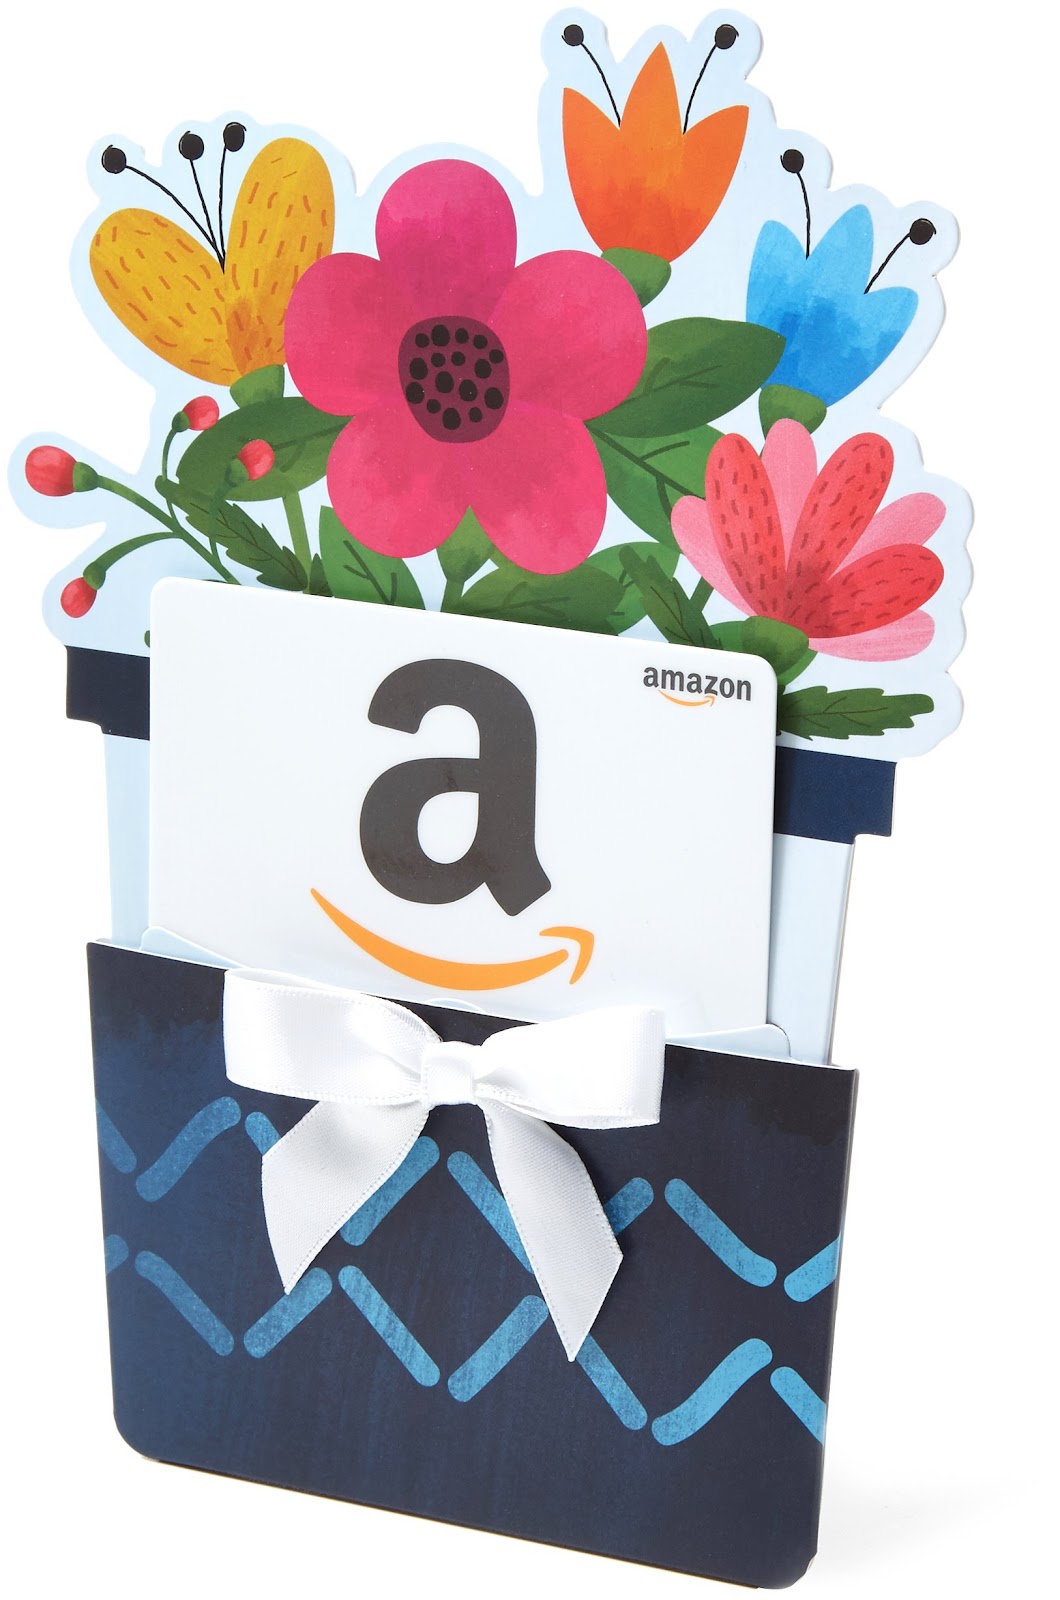 Amazon.com Gift Card in Flower Pot Reveal